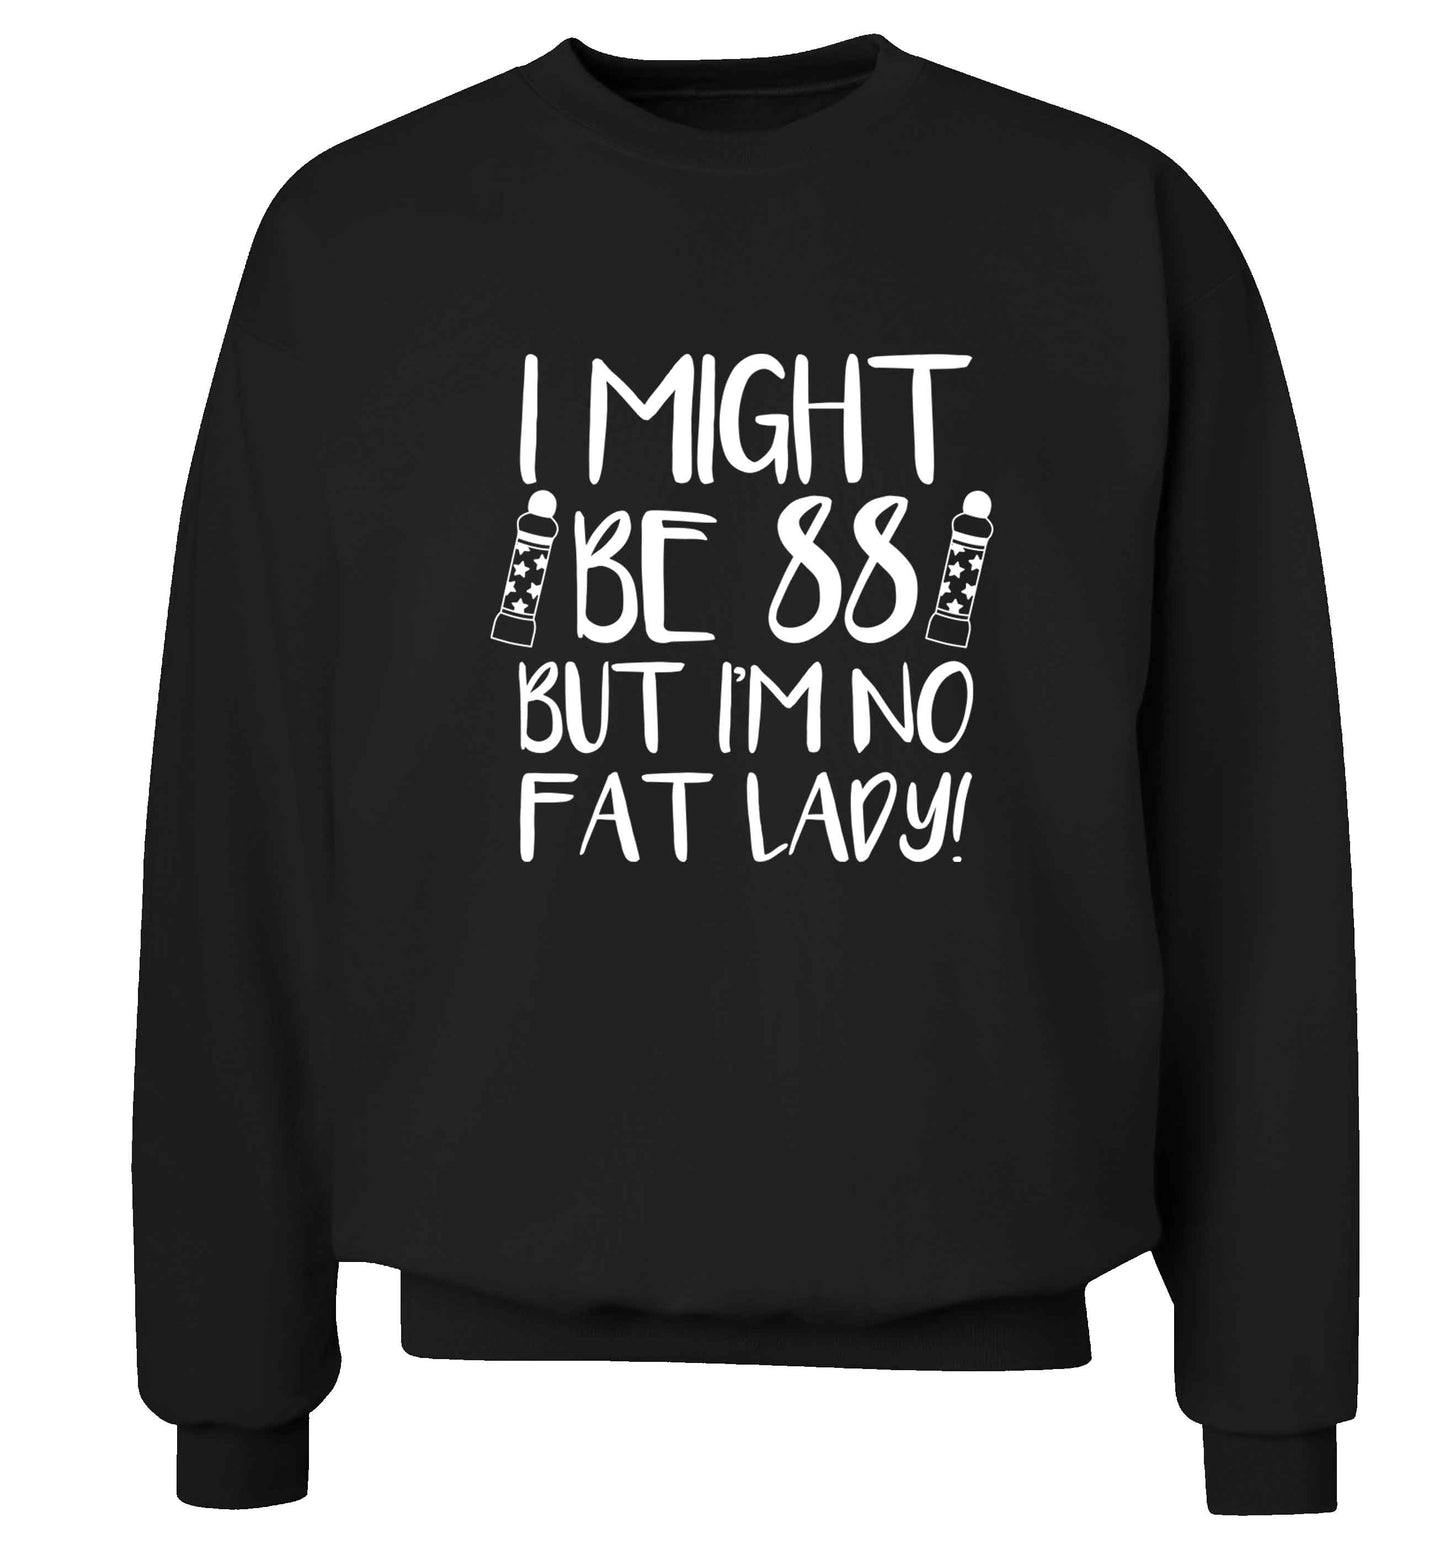 I might be 88 but I'm no fat lady Adult's unisex black Sweater 2XL